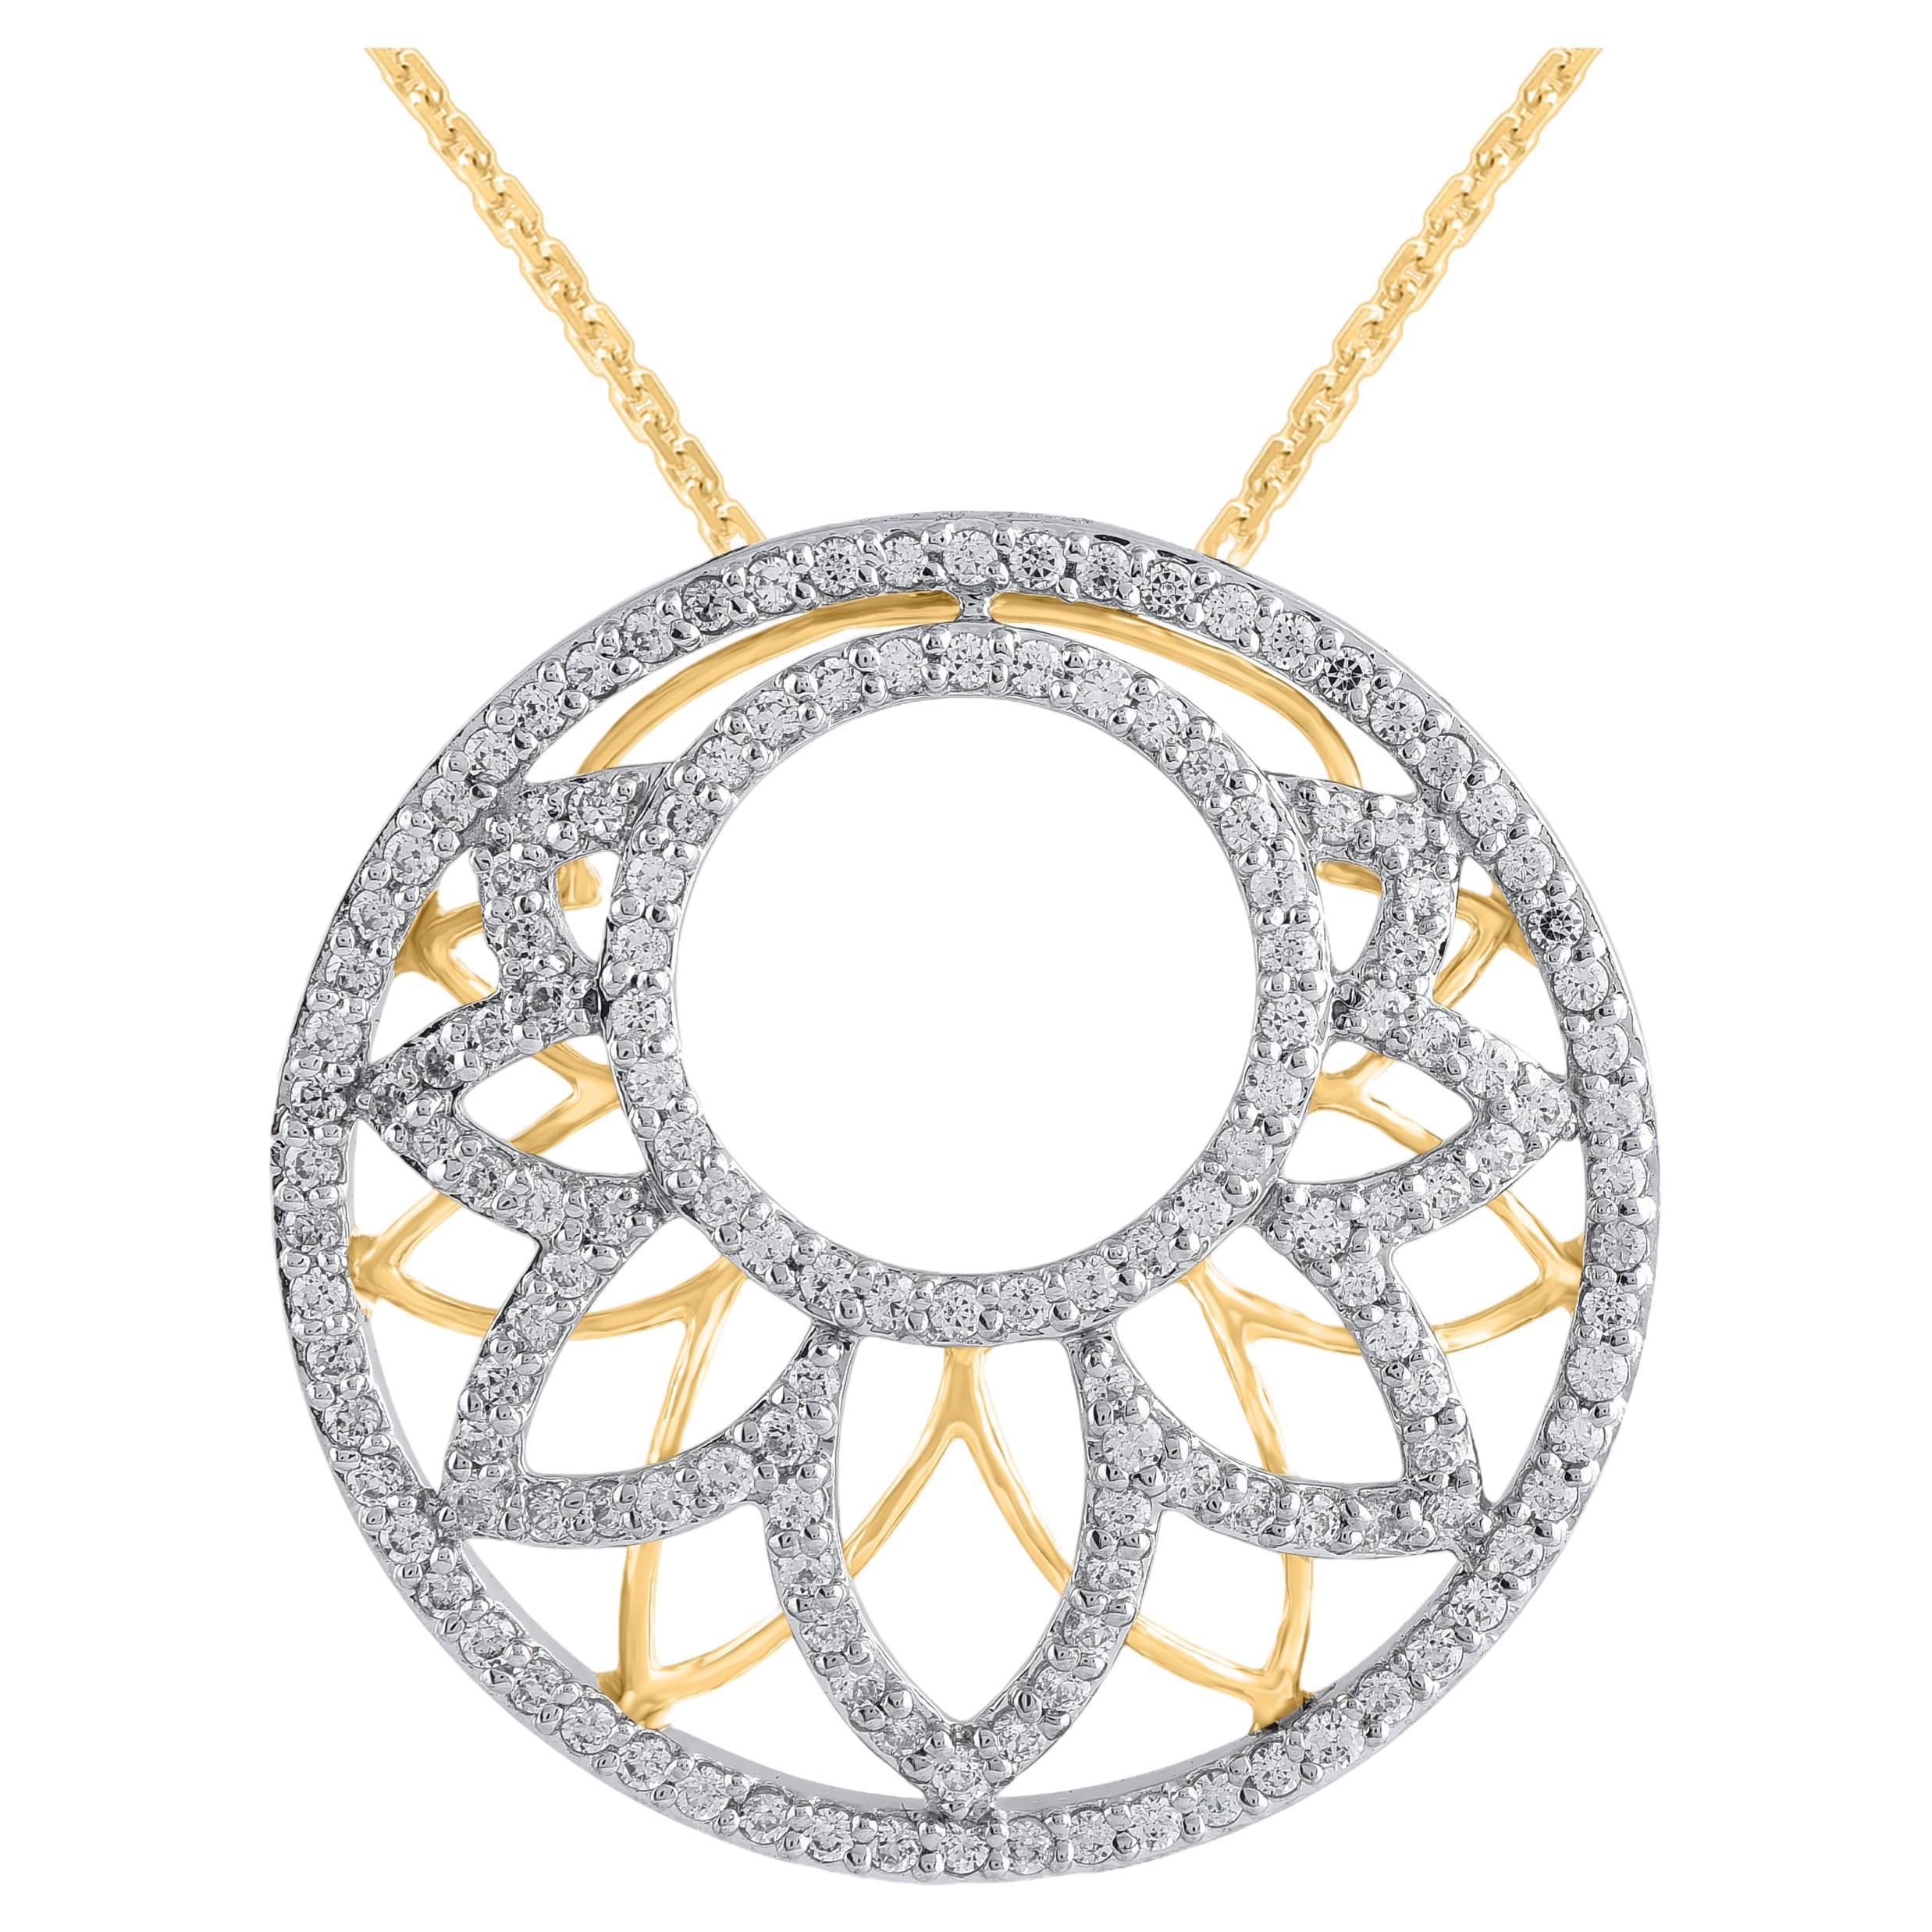 TJD 0.75 Carat Natural Round Cut Diamond Circle Pendant in 14KT Two Tone Gold